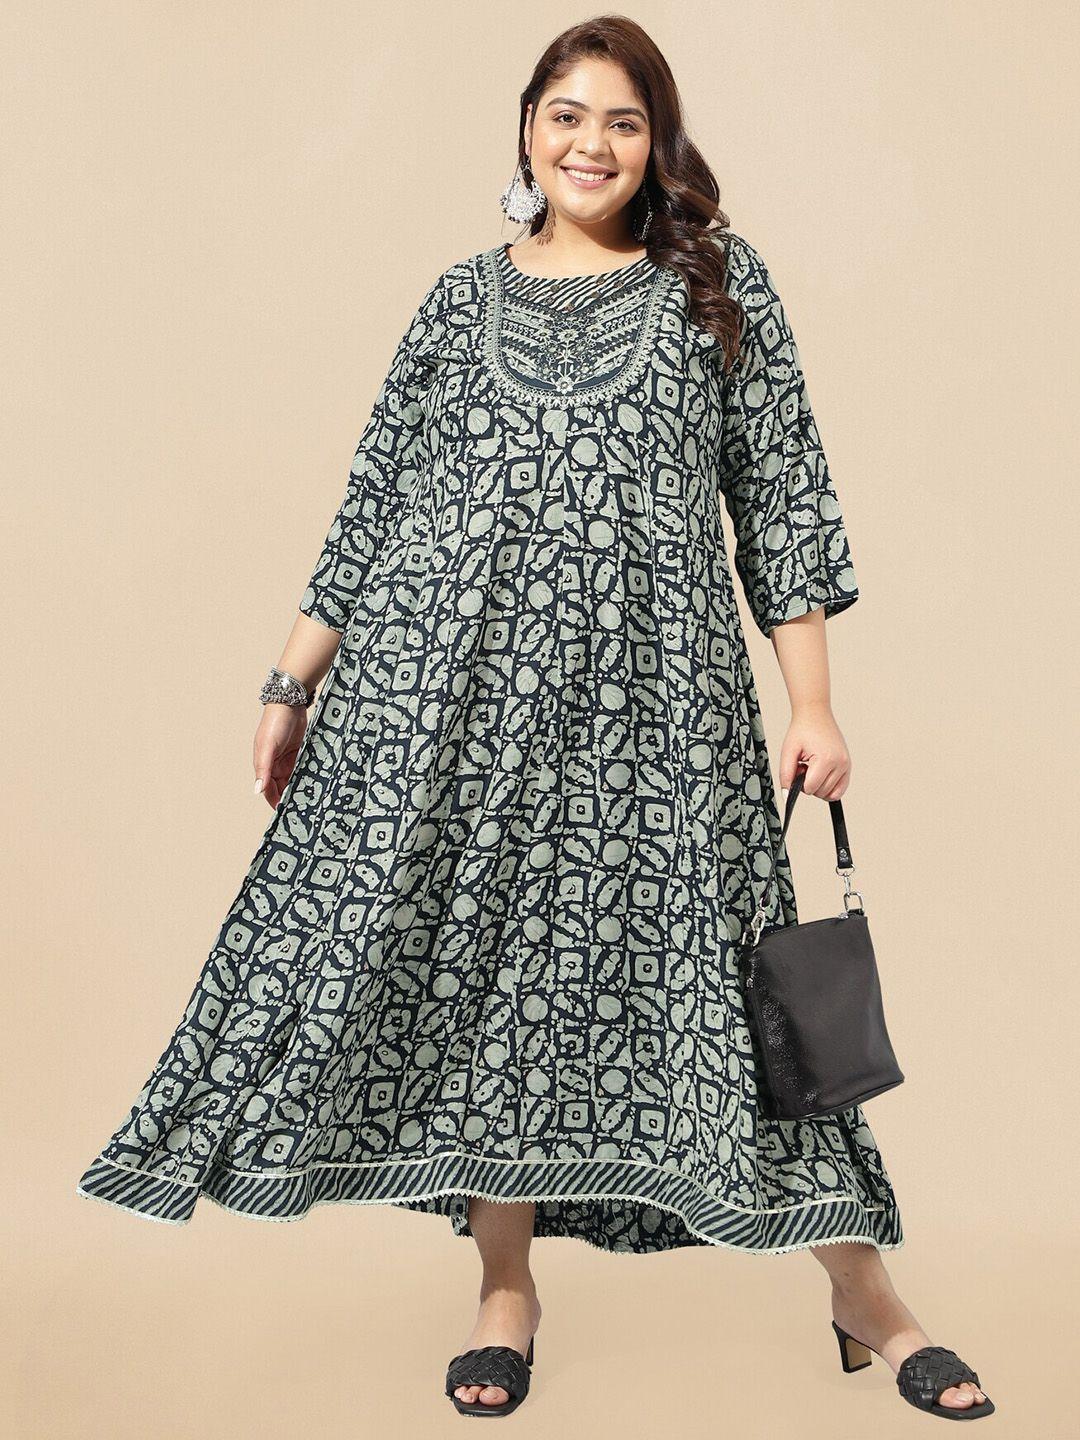 mirchi fashion navy blue plus size abstract printed embellished empire ethnic dress